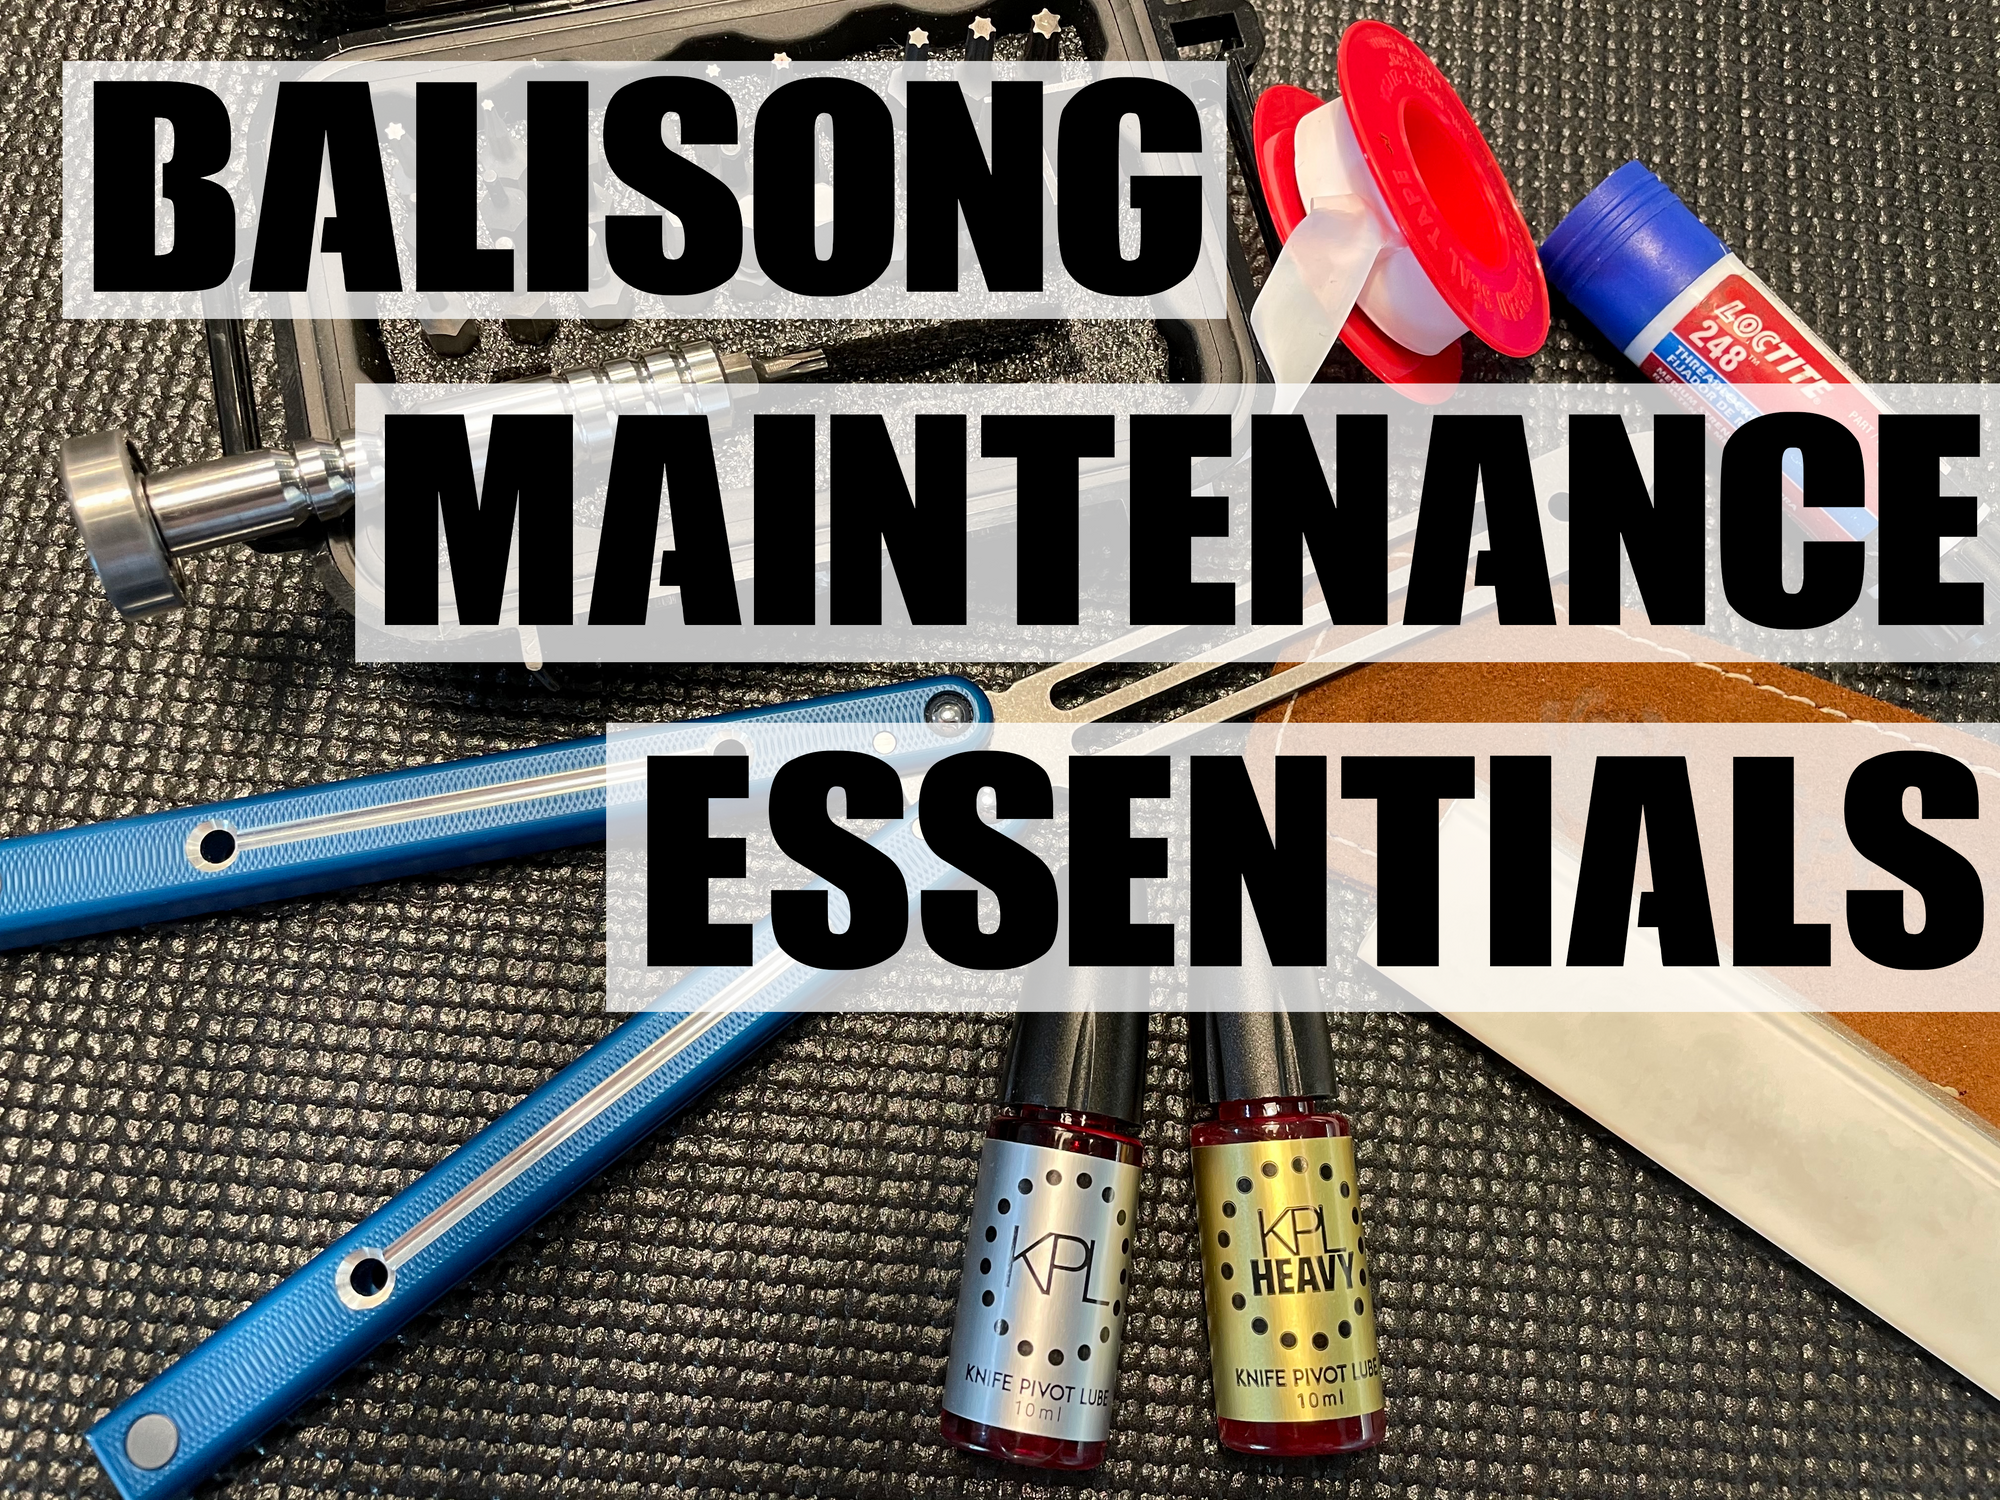 What's in a Balisong Maintenance Kit?